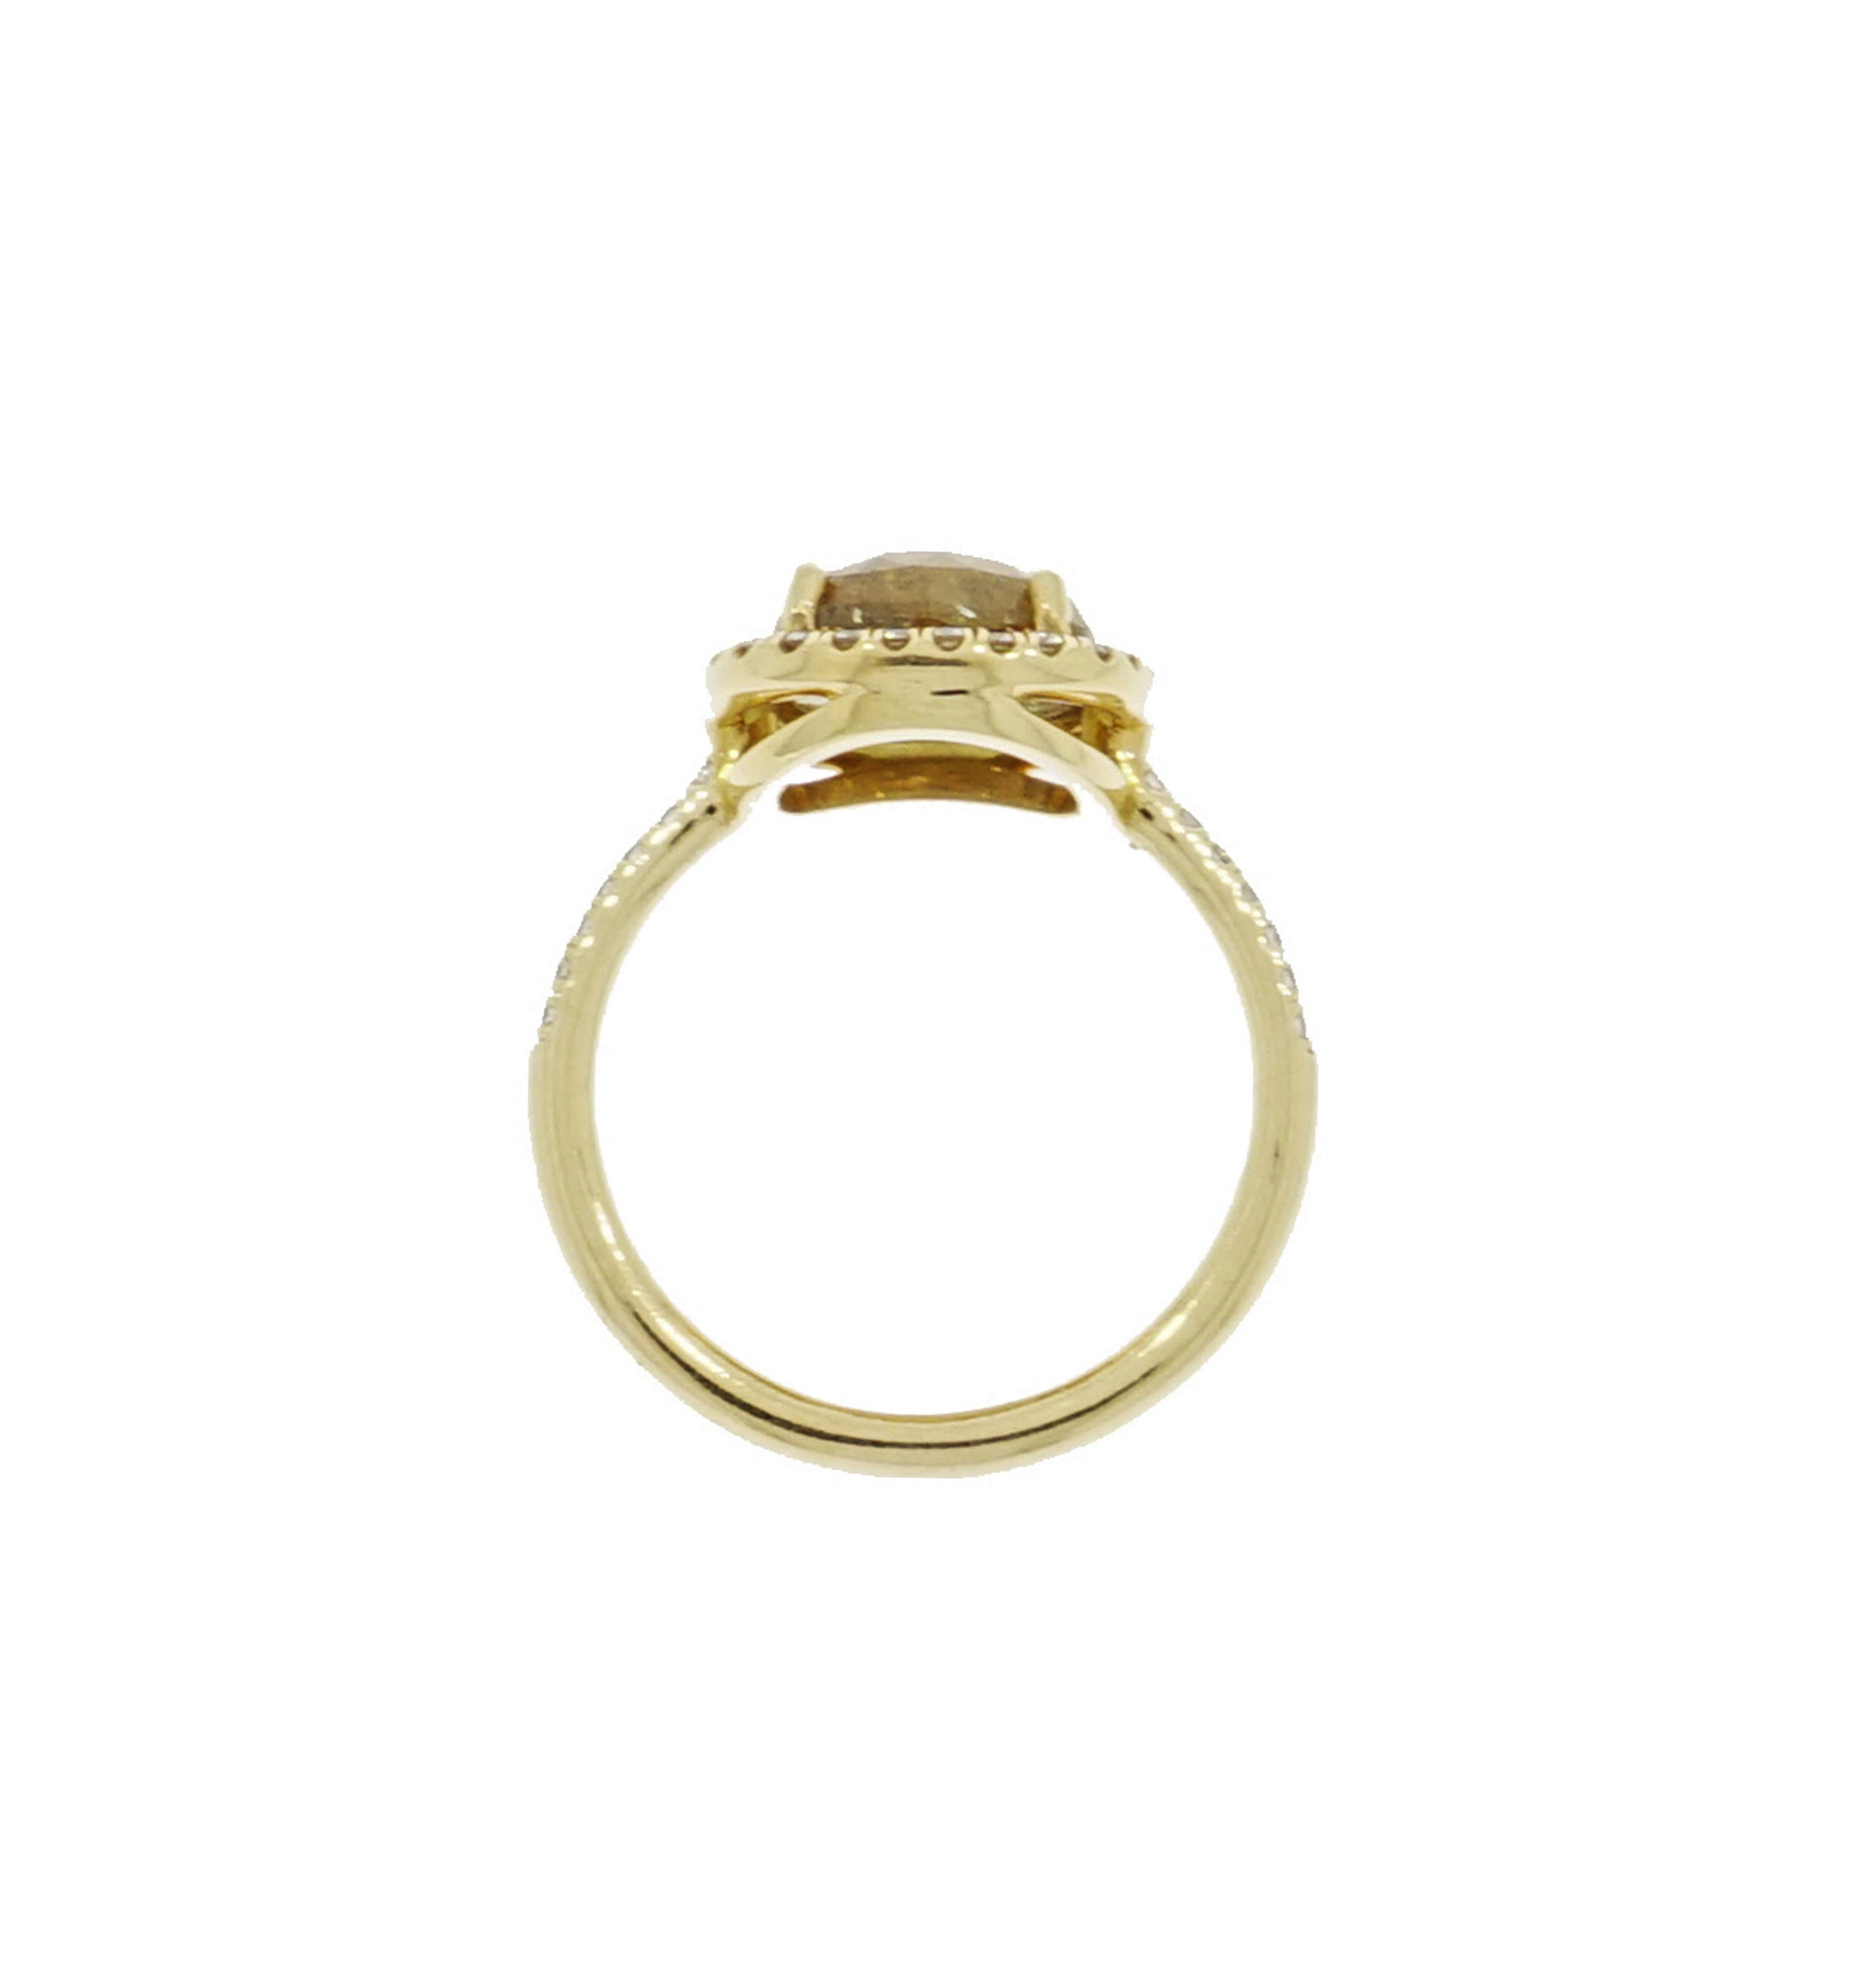 Unique and one of a kind... this cushion shaped Natural Yellow Sapphire is a fresh and youthful look that takes this oft-forgotten shade and is elevated with a perfect yellow gold frame of white diamonds.
Designed and created in NYC for a finger